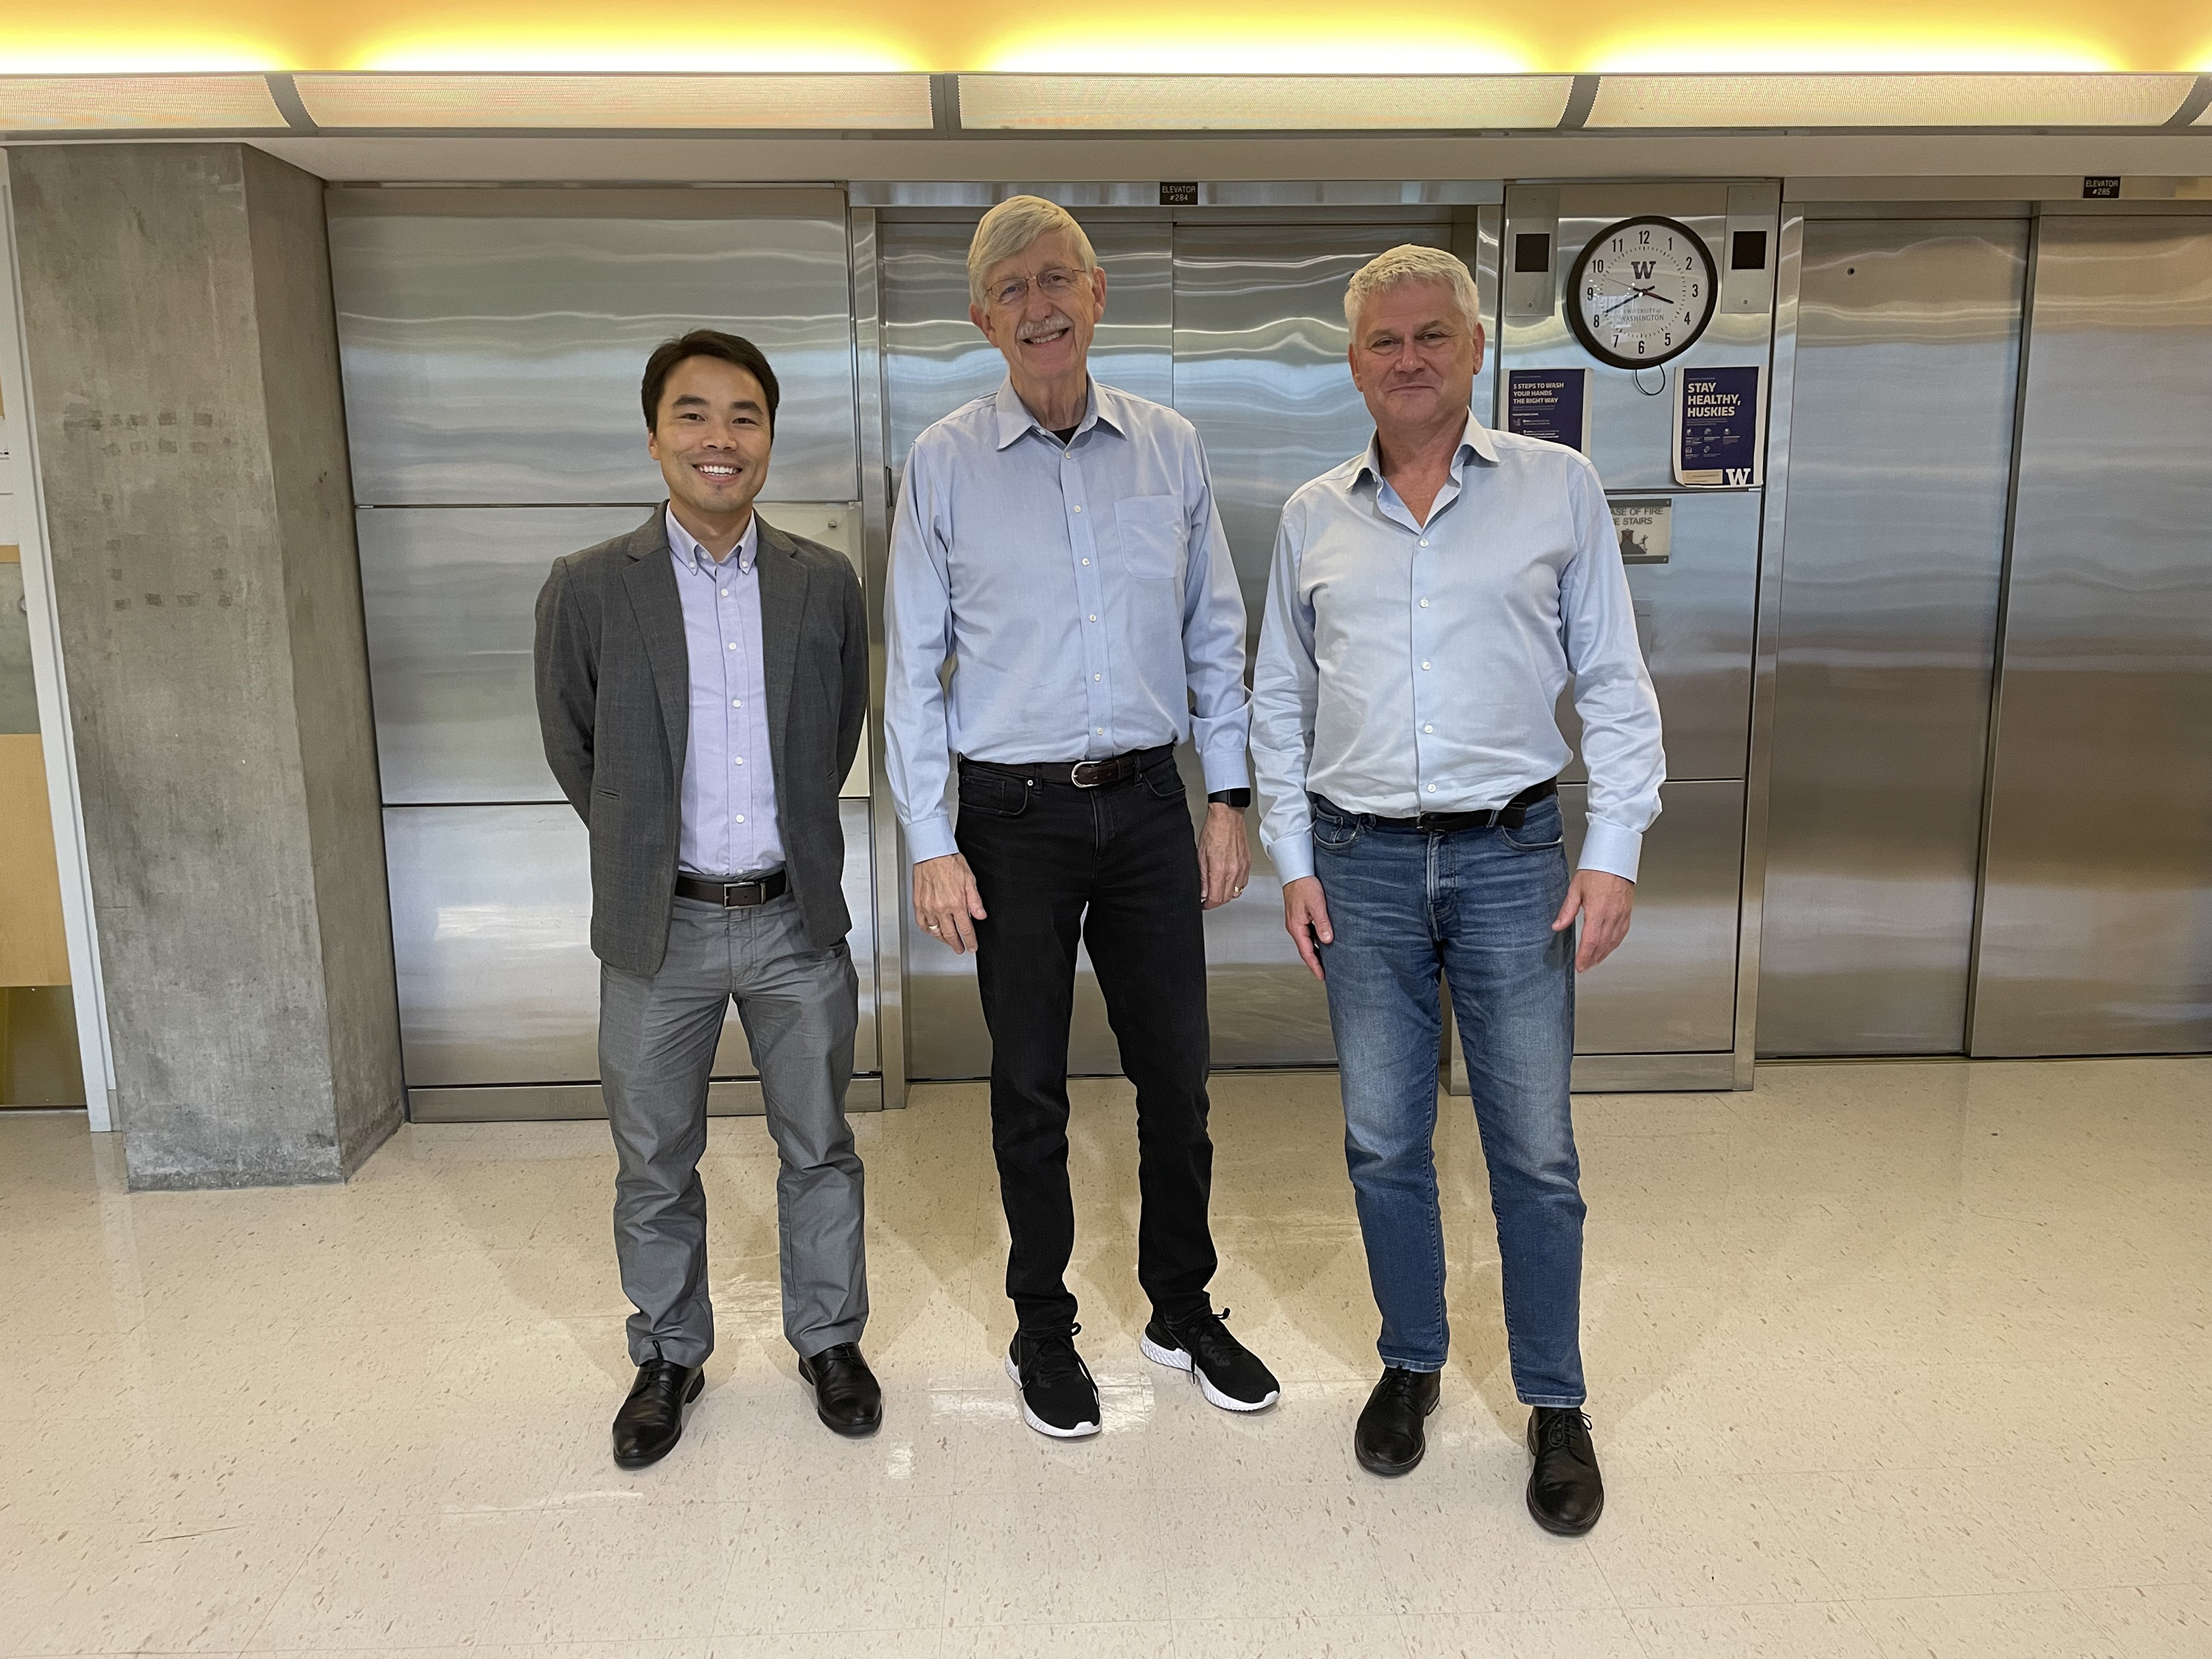 Drs. Chang Li, research assistant professor, and André Lieber, professor (Medical Genetics) recently met with former NIH Director Dr. Francis Collins